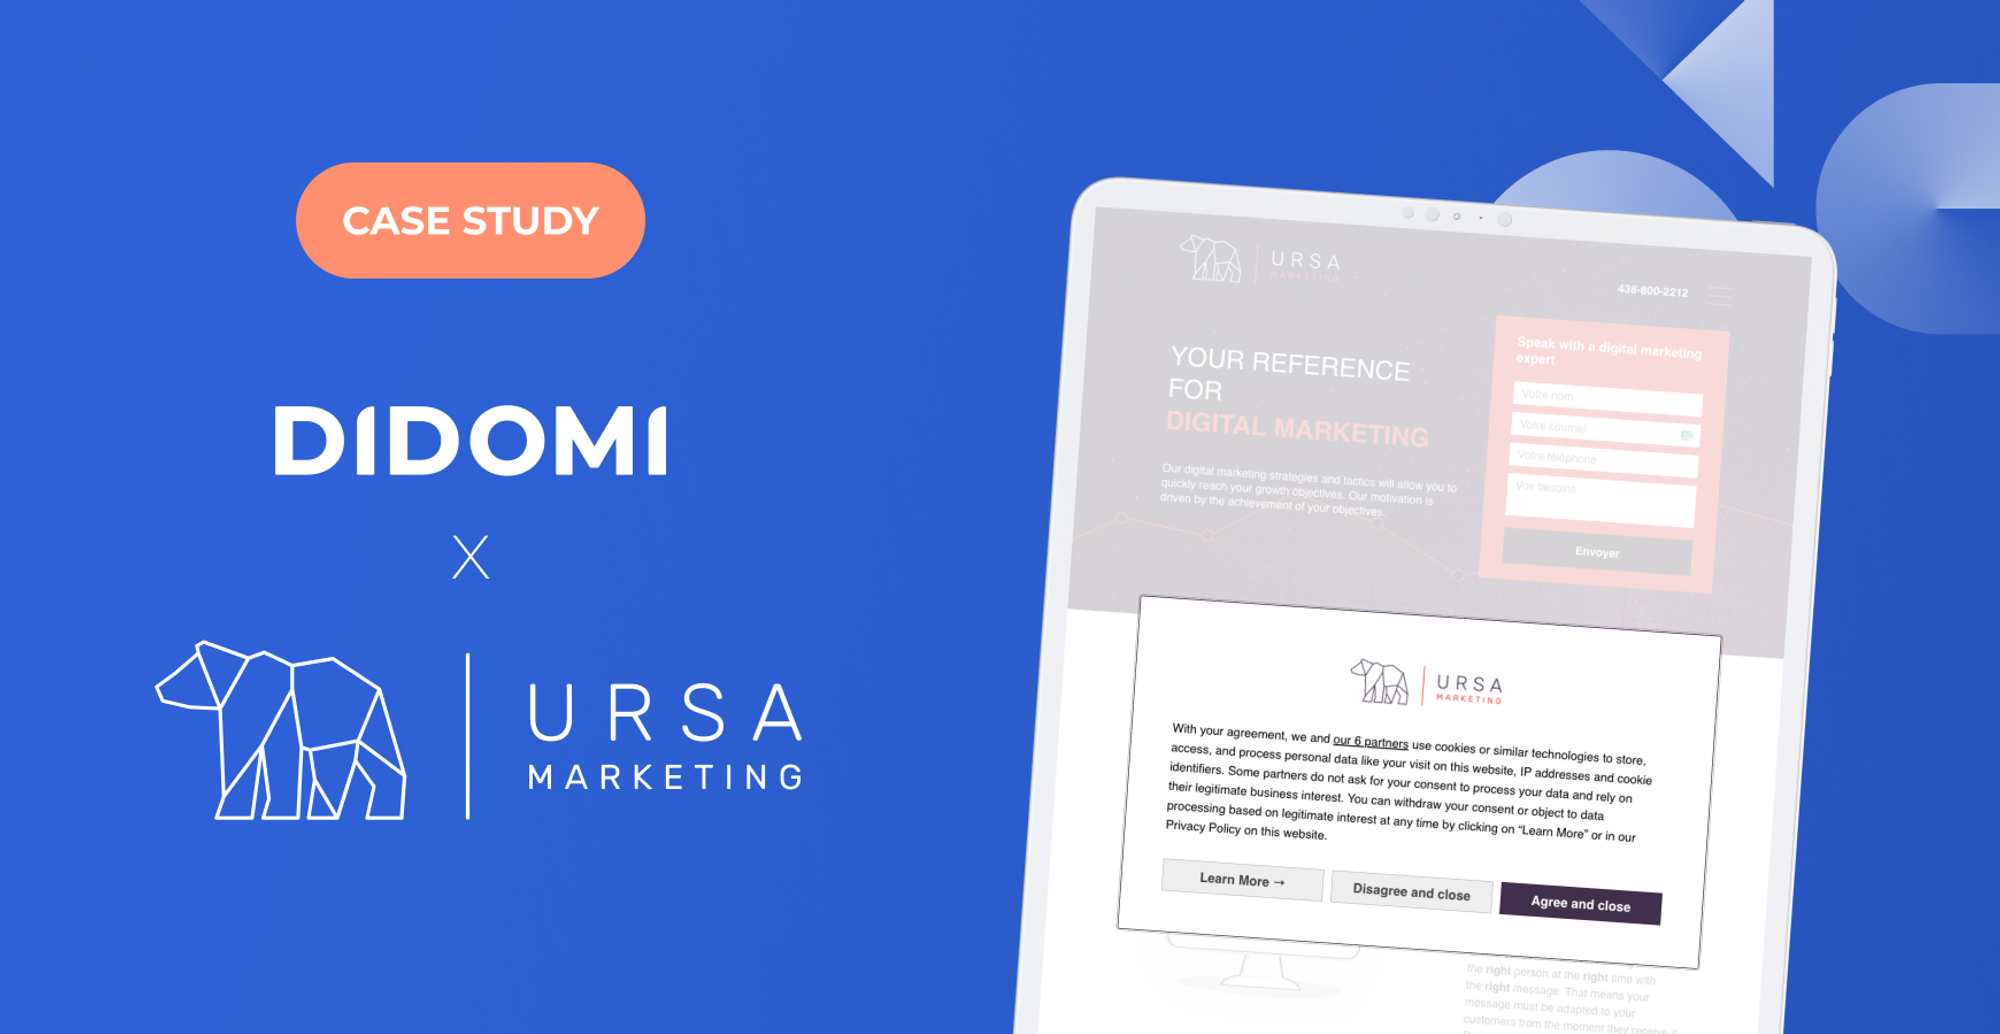 How did Didomi support its partner URSA Marketing in tackling the challenges of Law 25 in Canada?